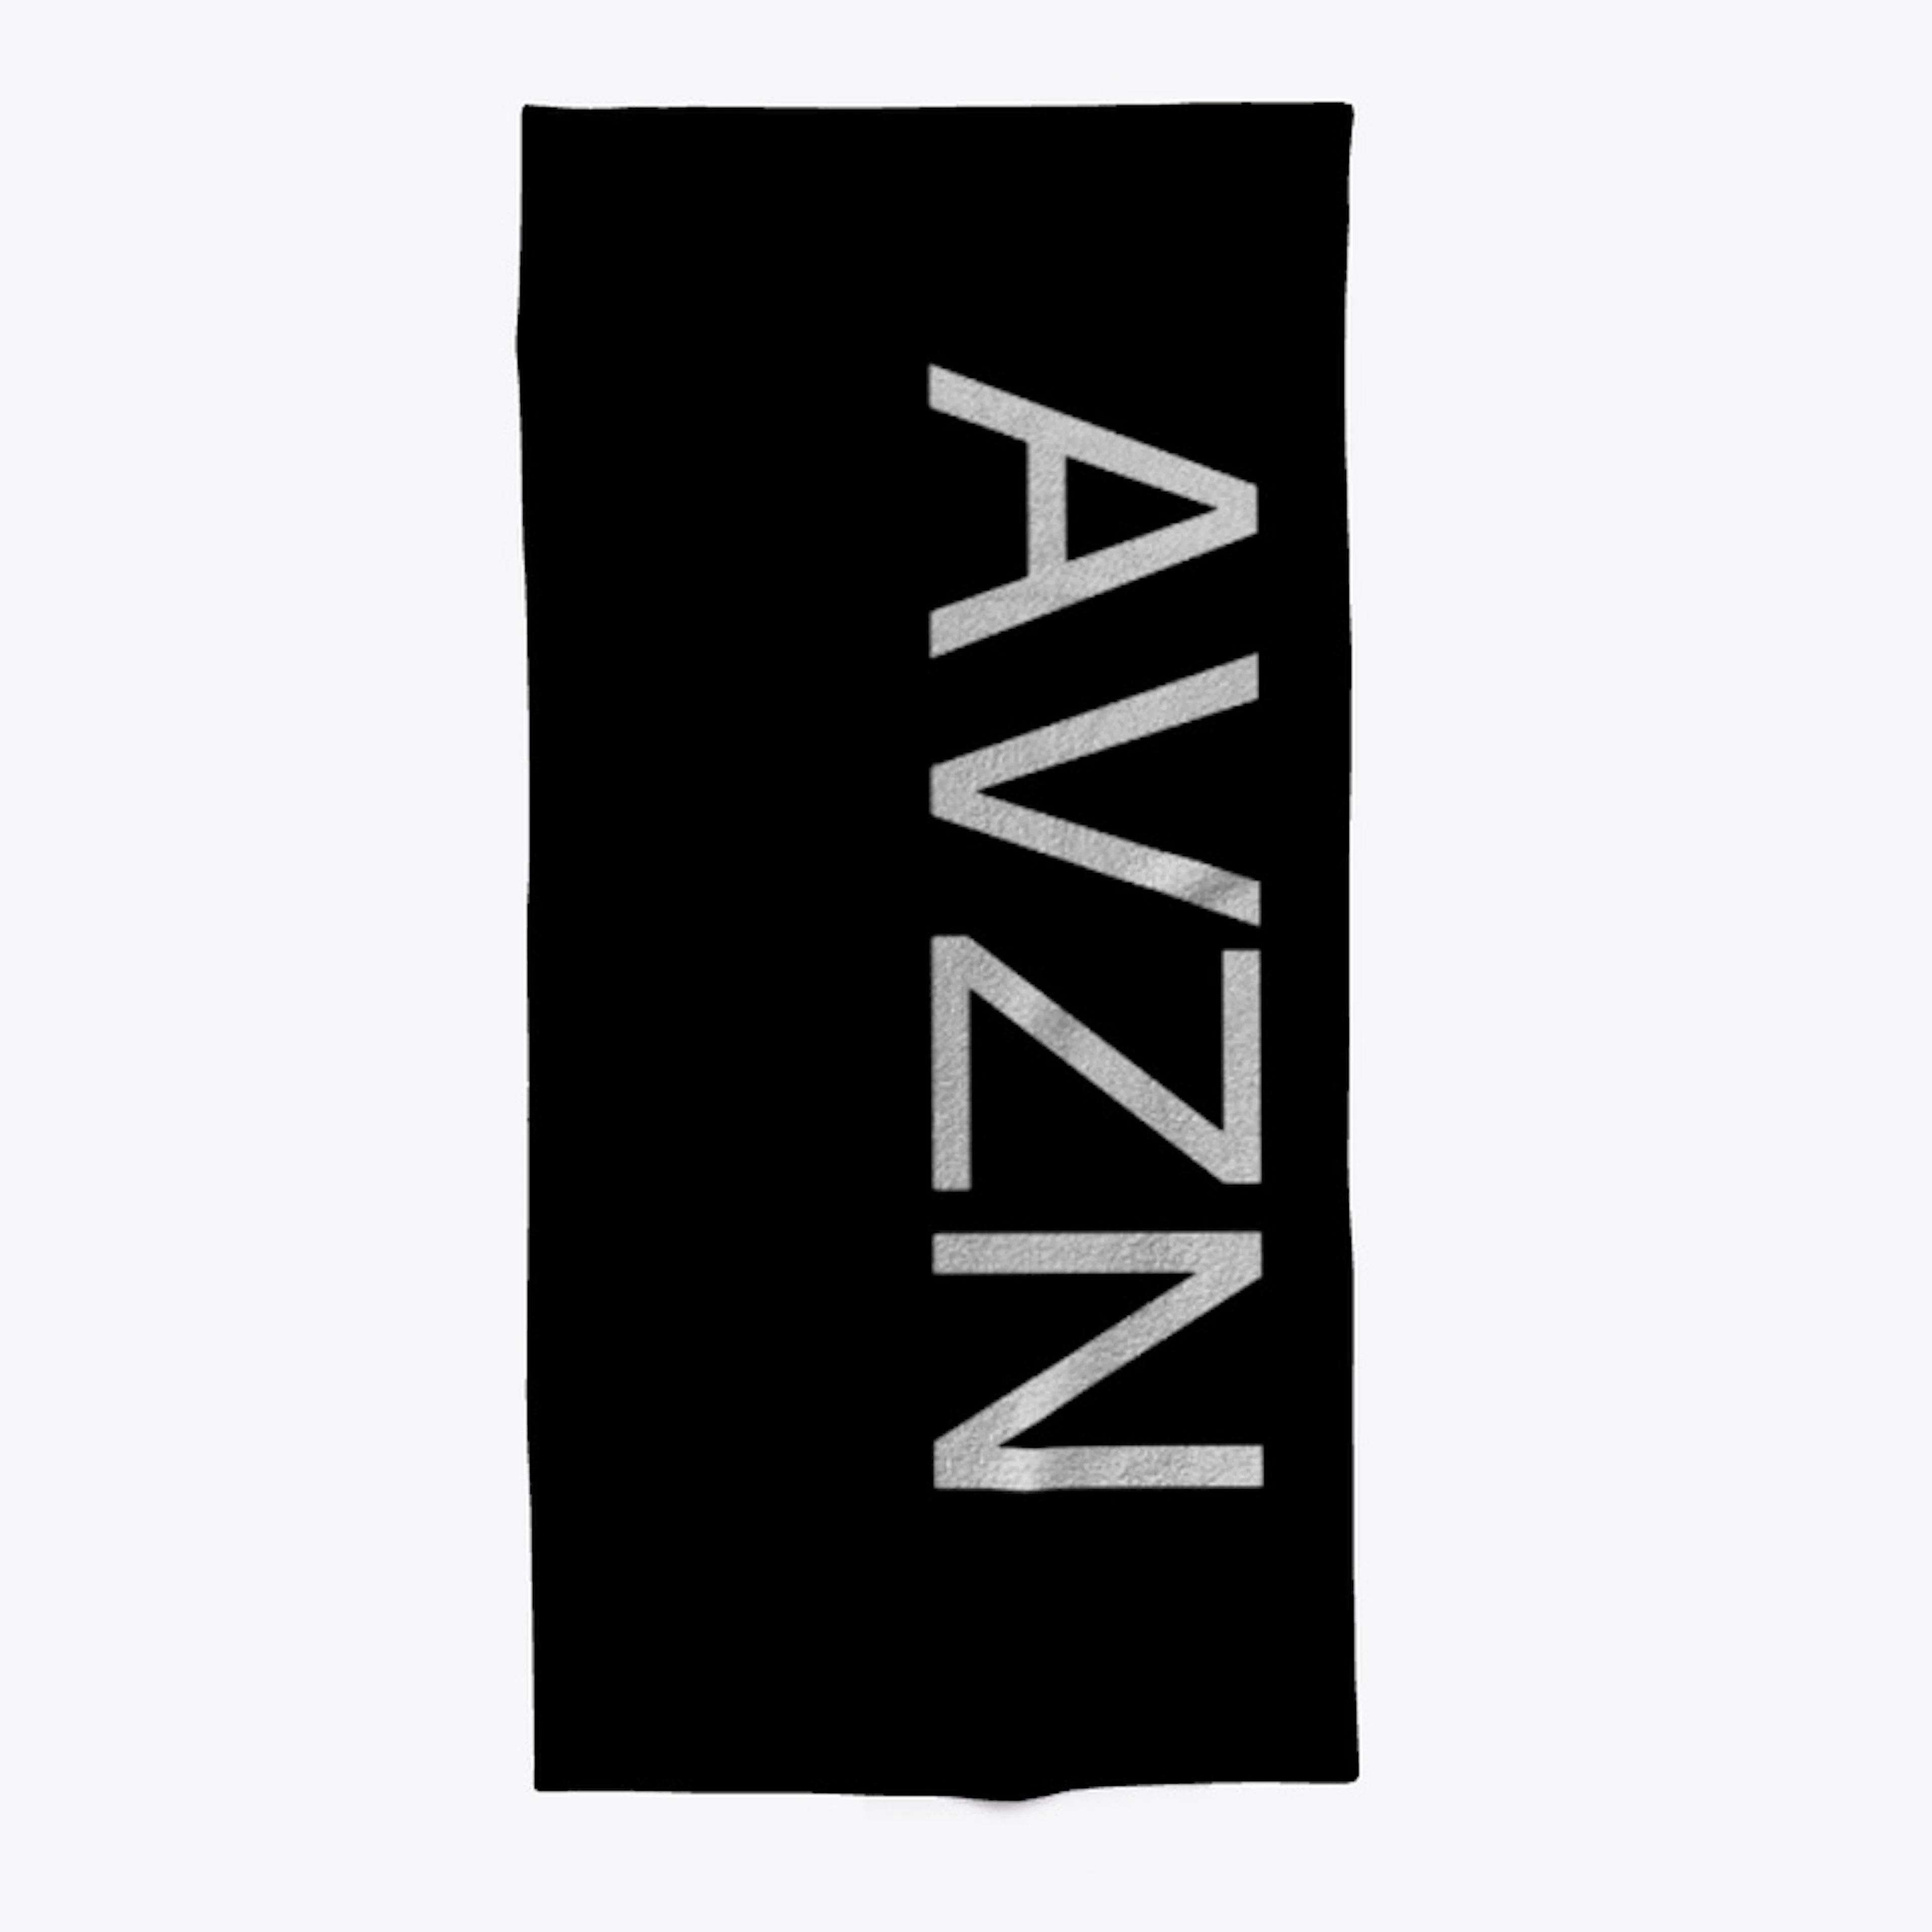 AVZN Collection